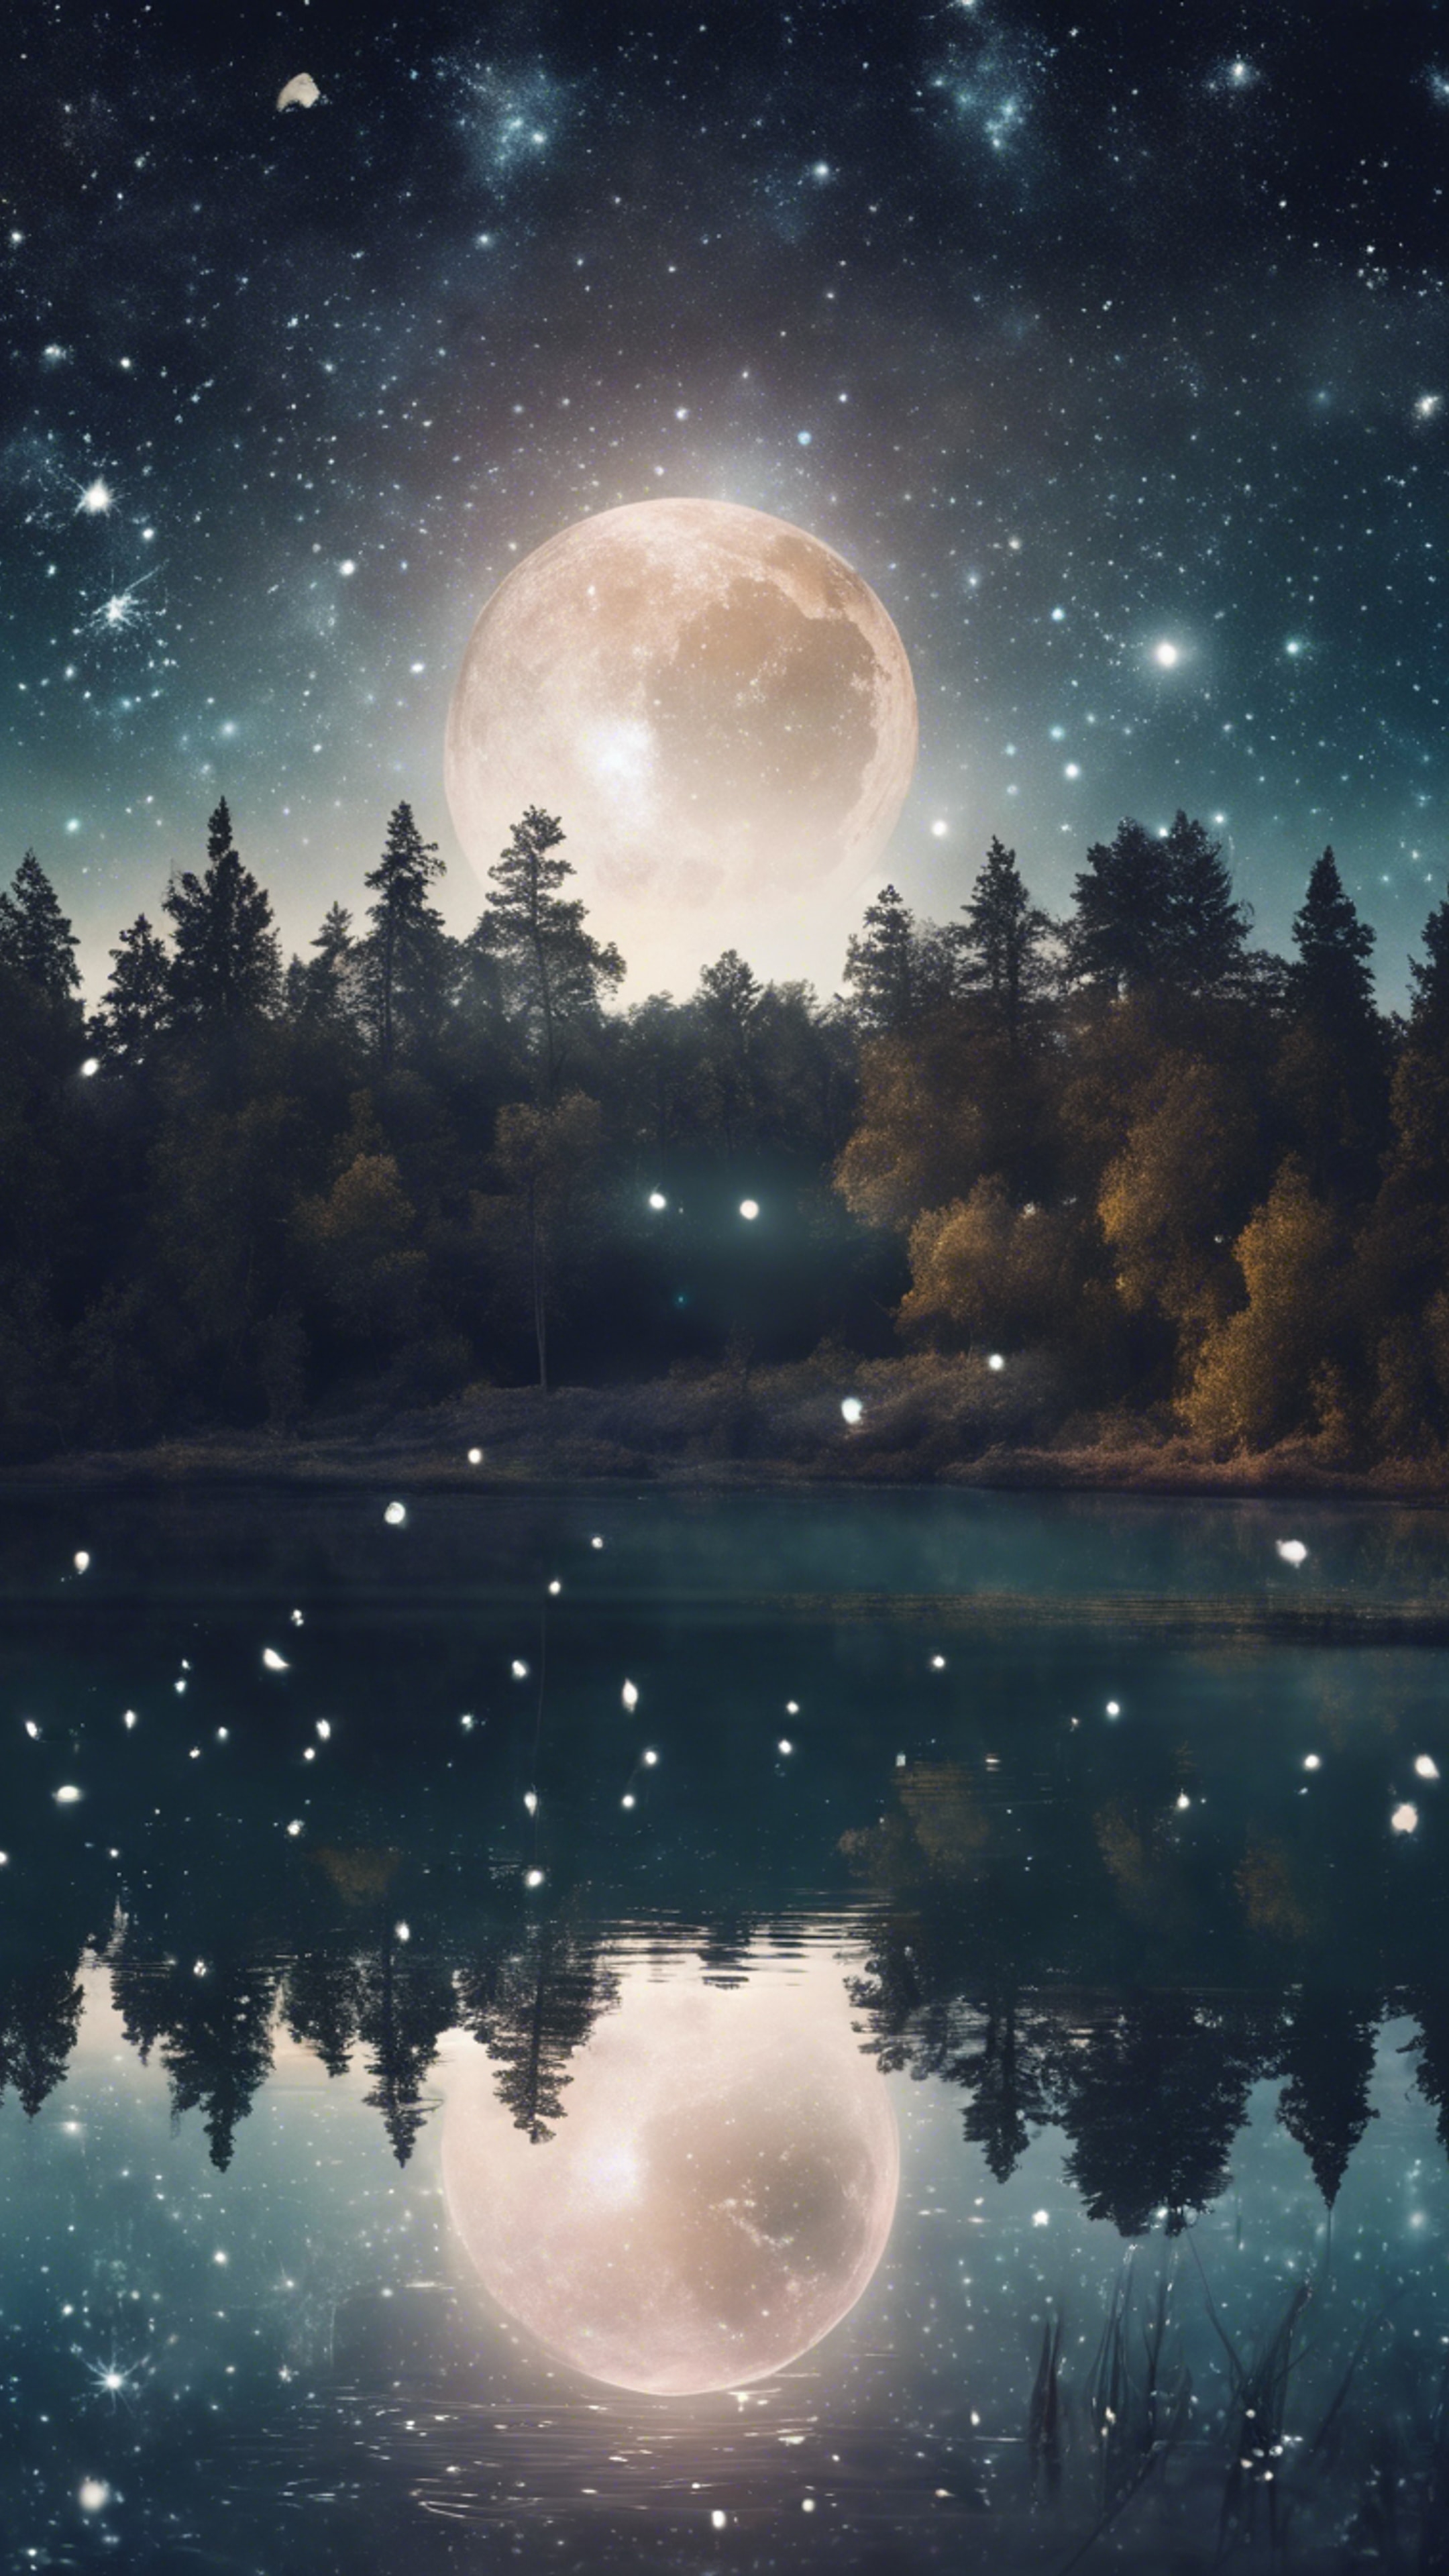 A mystical night sky over a tranquil lake, filled with sparkling constellations and a magical, translucent moon. Тапет[02f115e6e6dc4626b628]